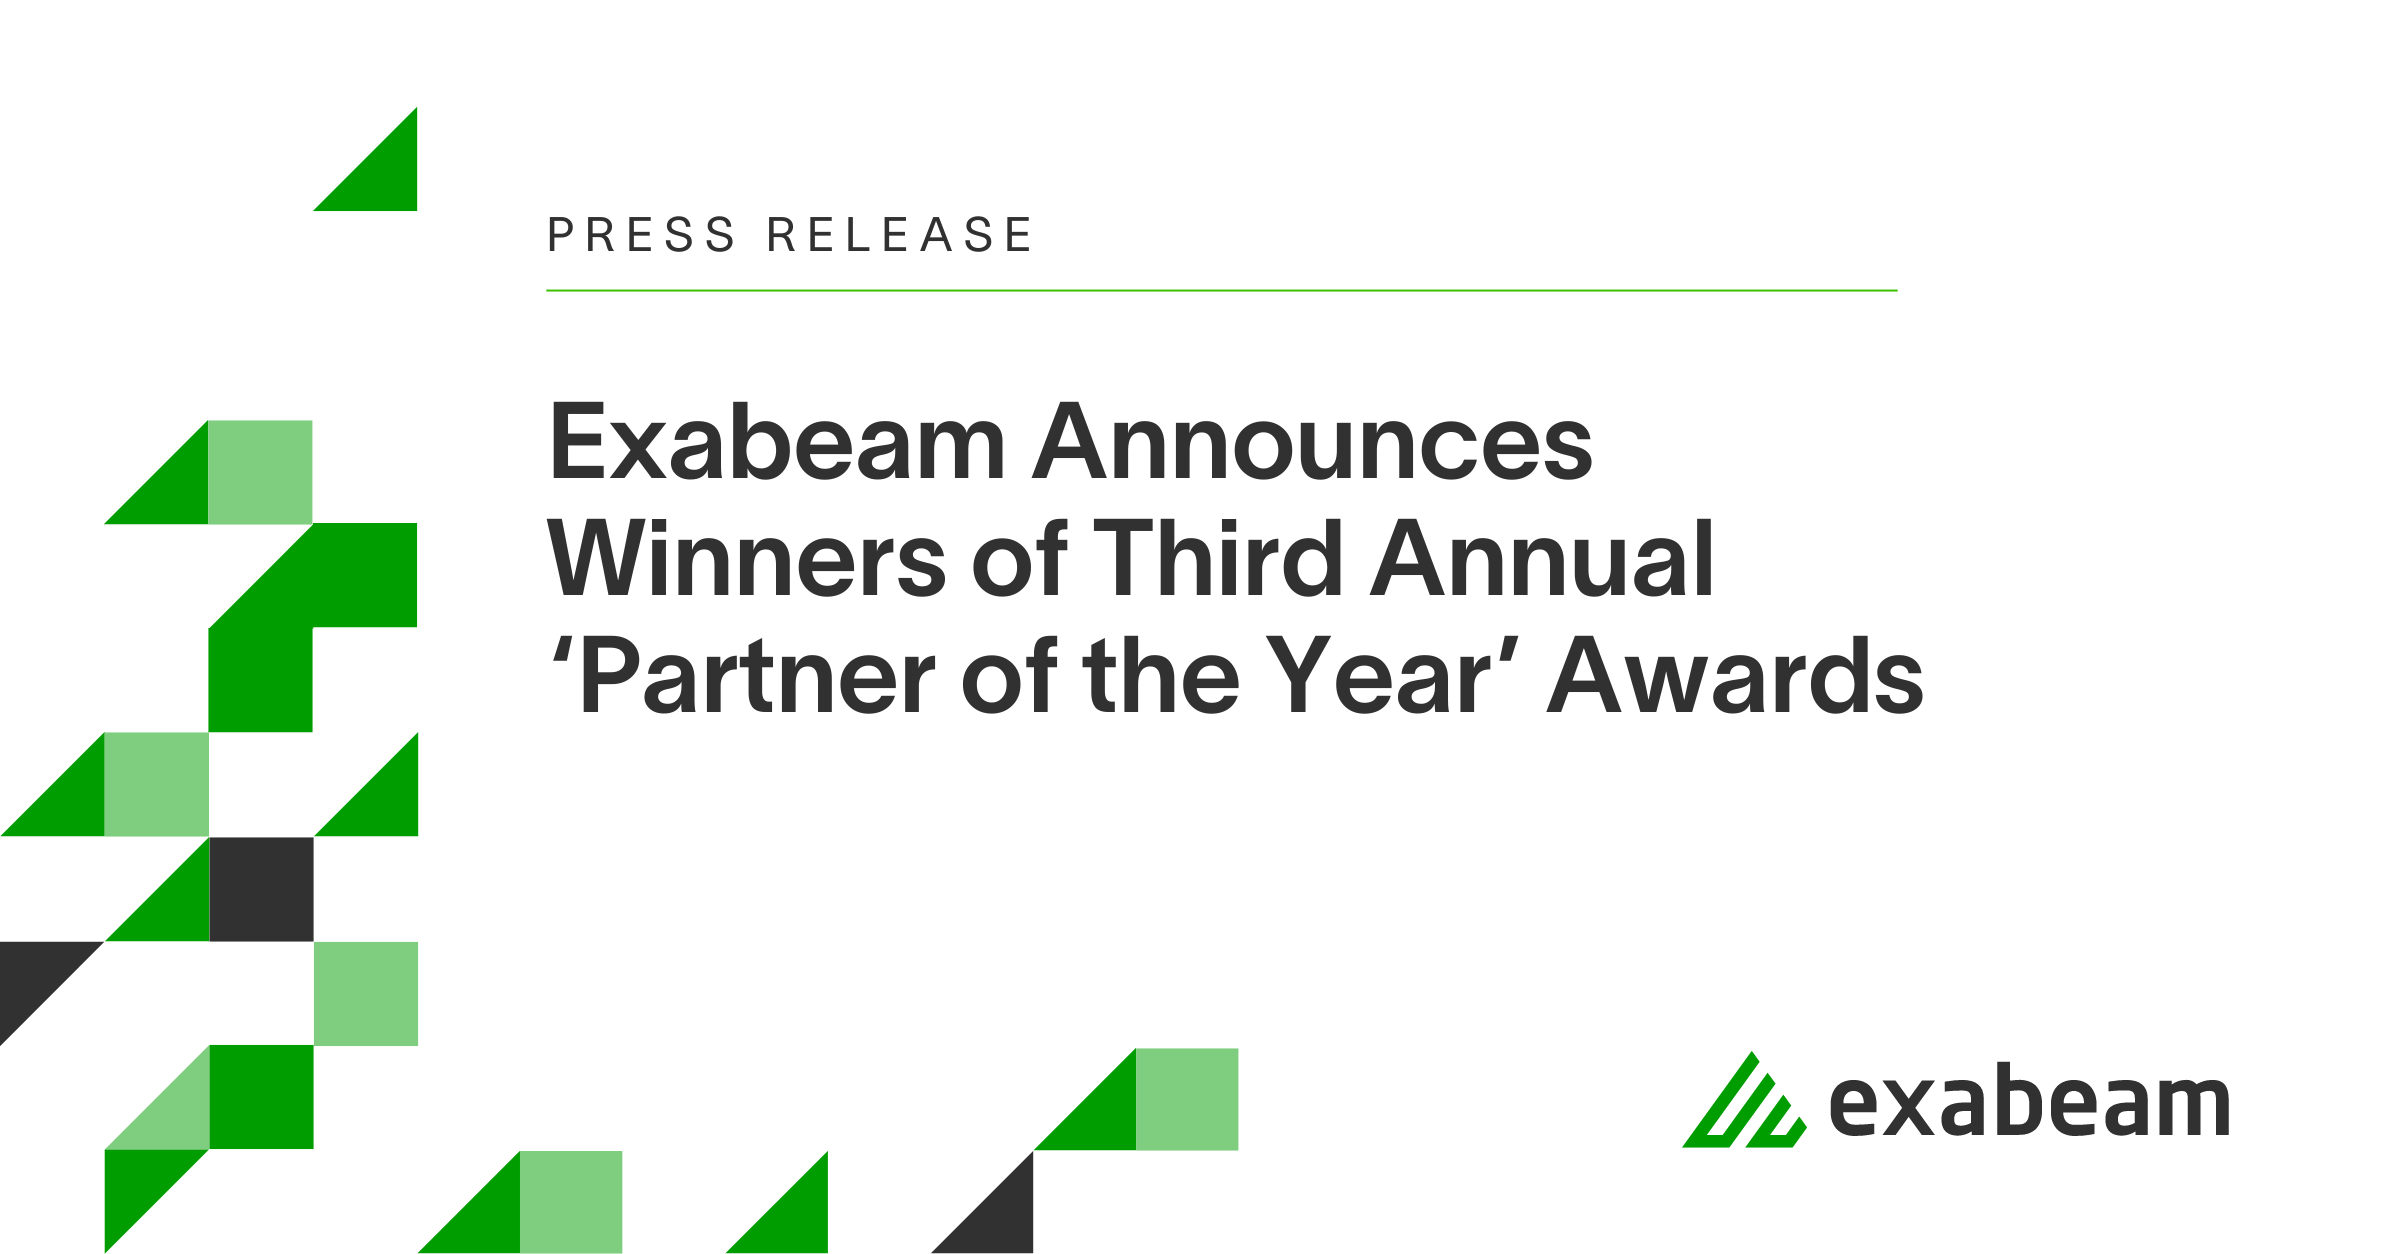 Exabeam Announces Winners of Third Annual ‘Partner of the Year’ Awards